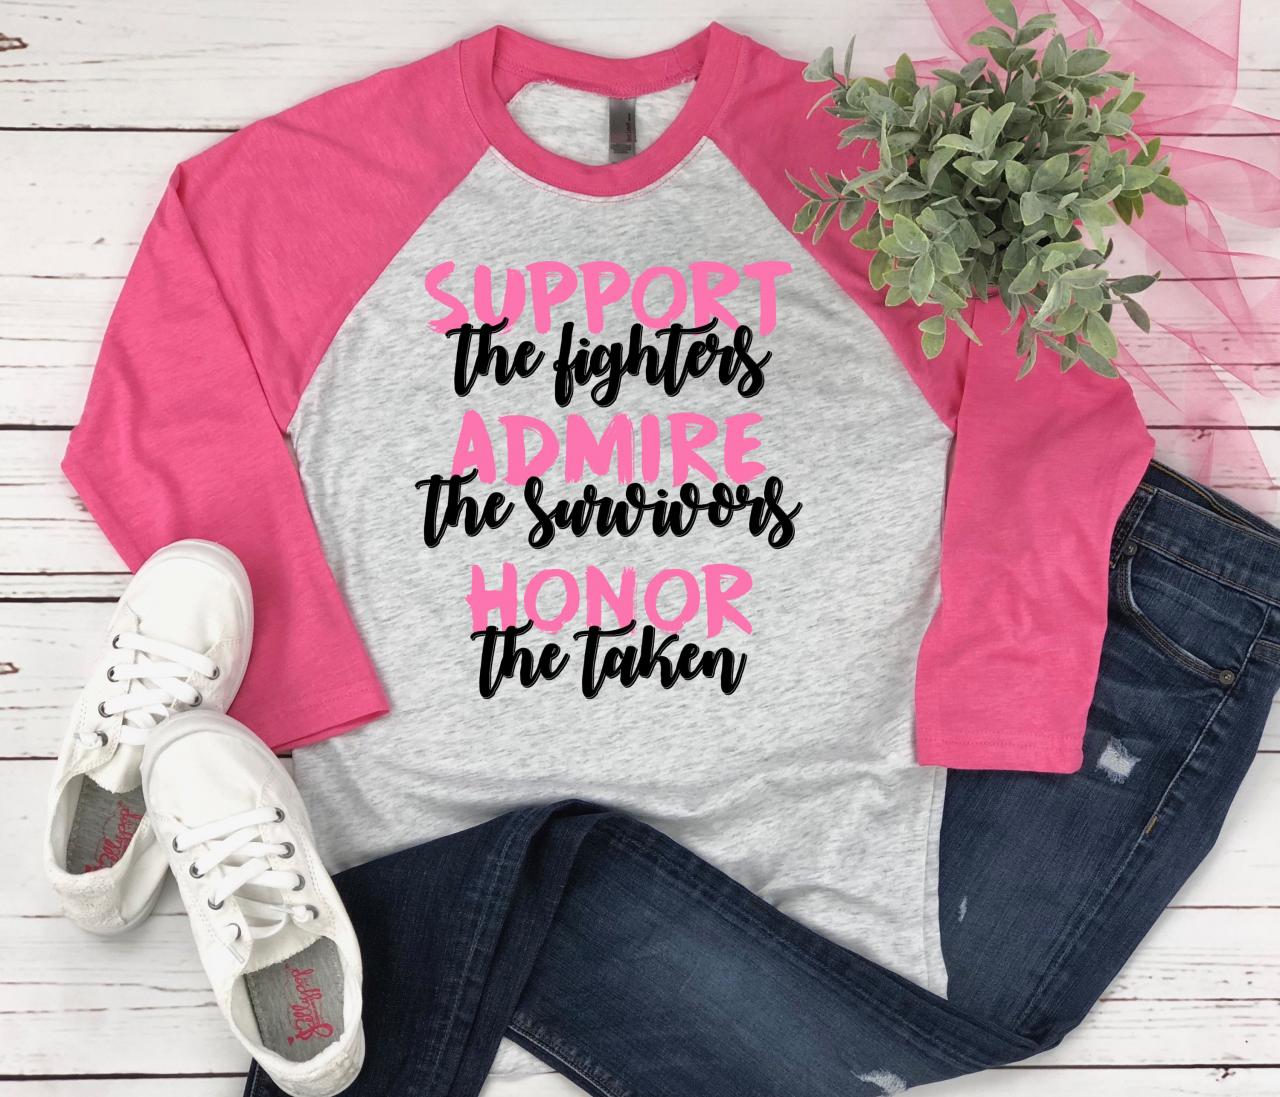 Breast Cancer Awareness. Wear Pink. October. Support. Admire. Honor.unisex.raglan. Sublimation.